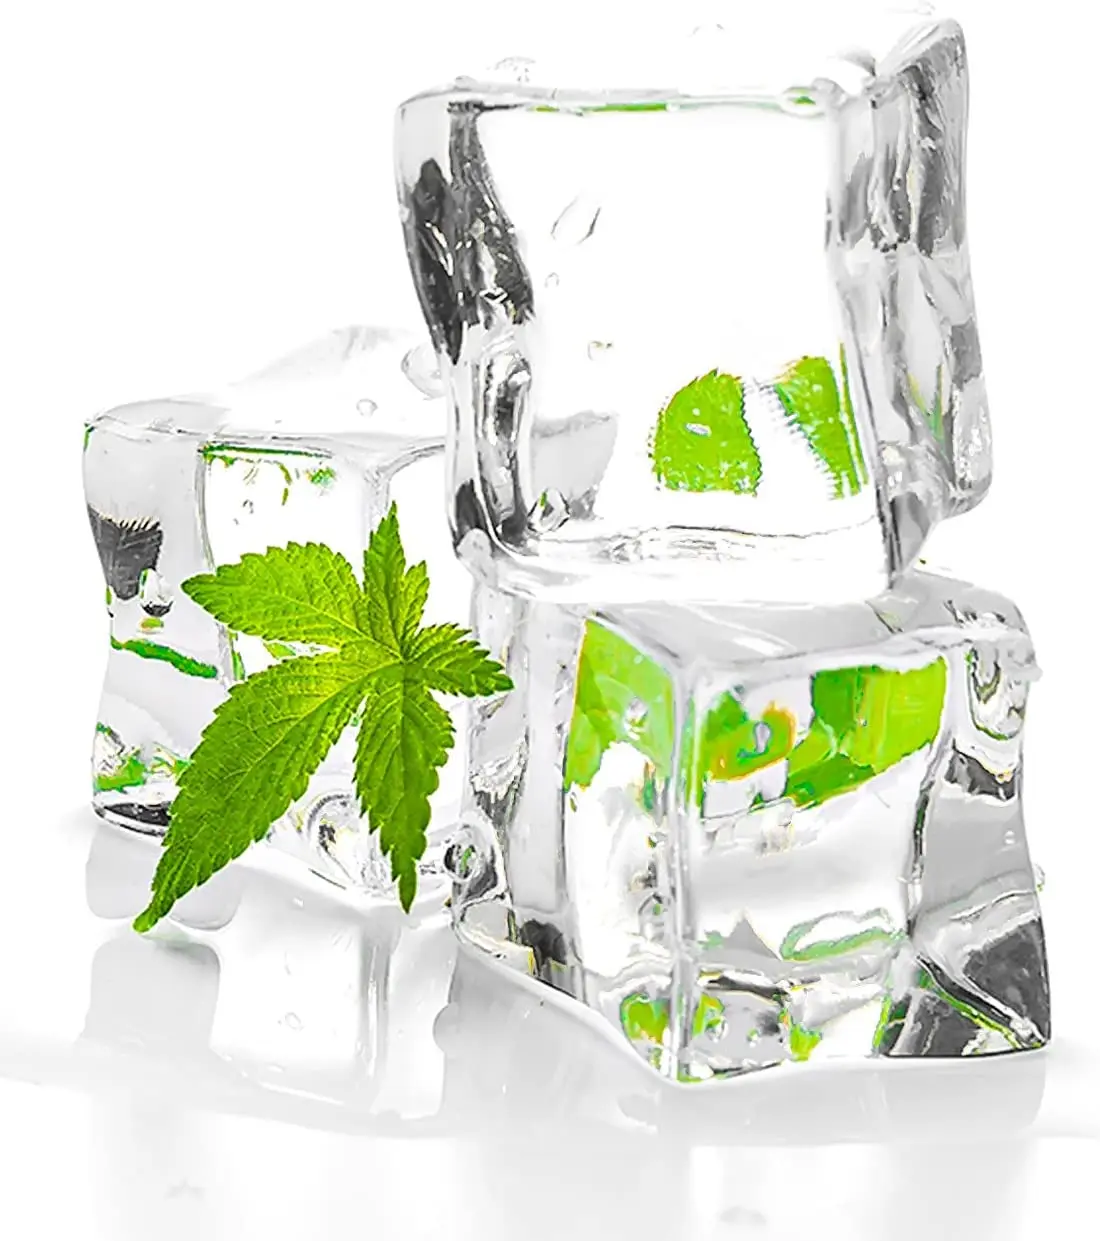 

Clear Fake Ice Acrylic Decorative Ice Cubes Display for Home Decoration Wedding Centerpiece Vase Fillers,Photography